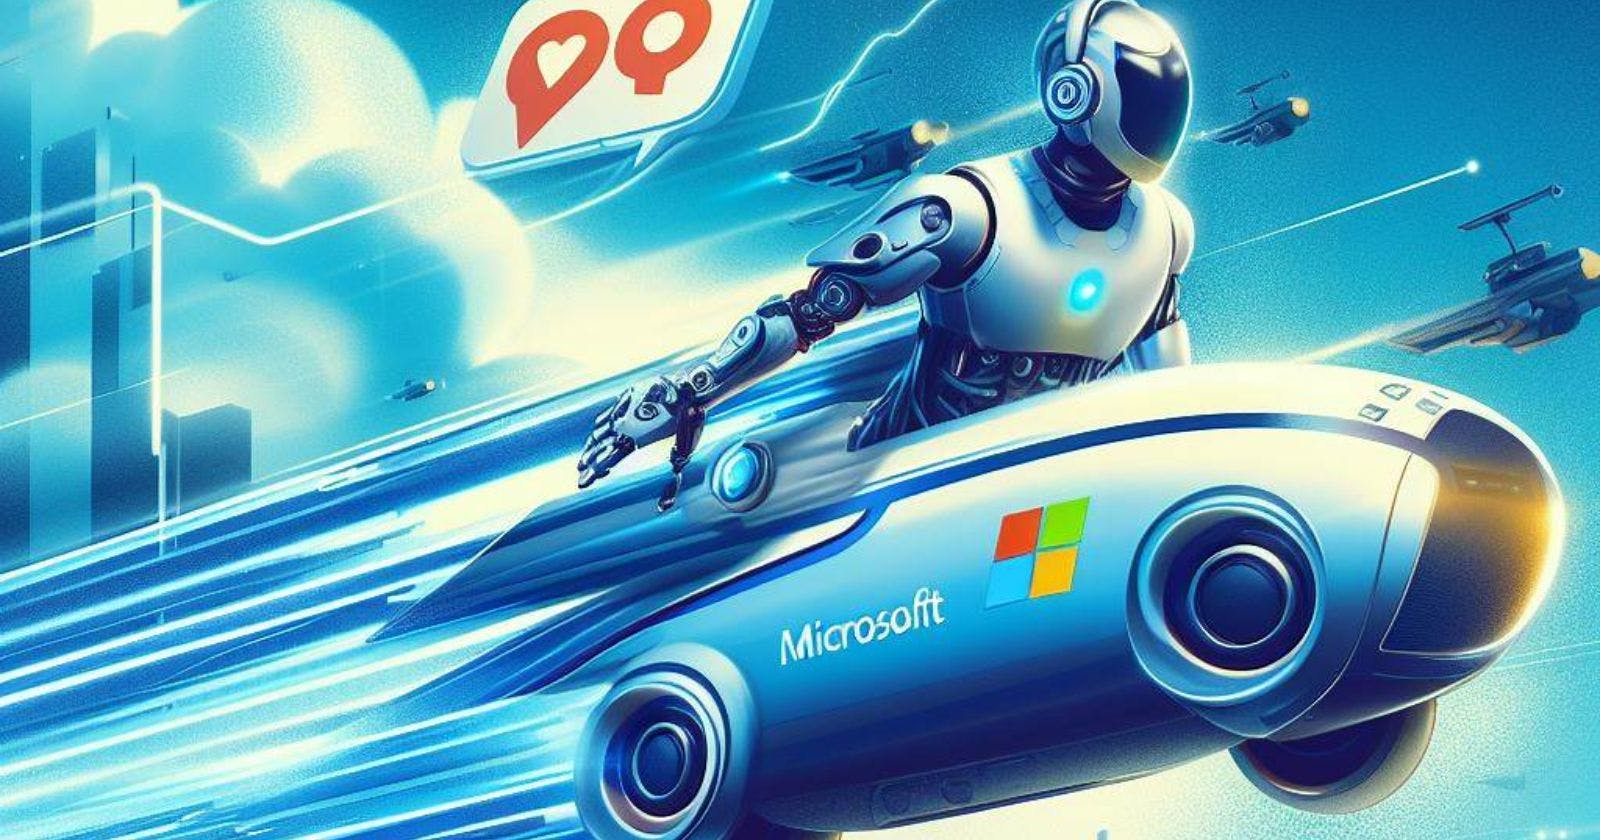 Microsoft Bets Big on AI with Copilot - But Can it Dethrone ChatGPT?